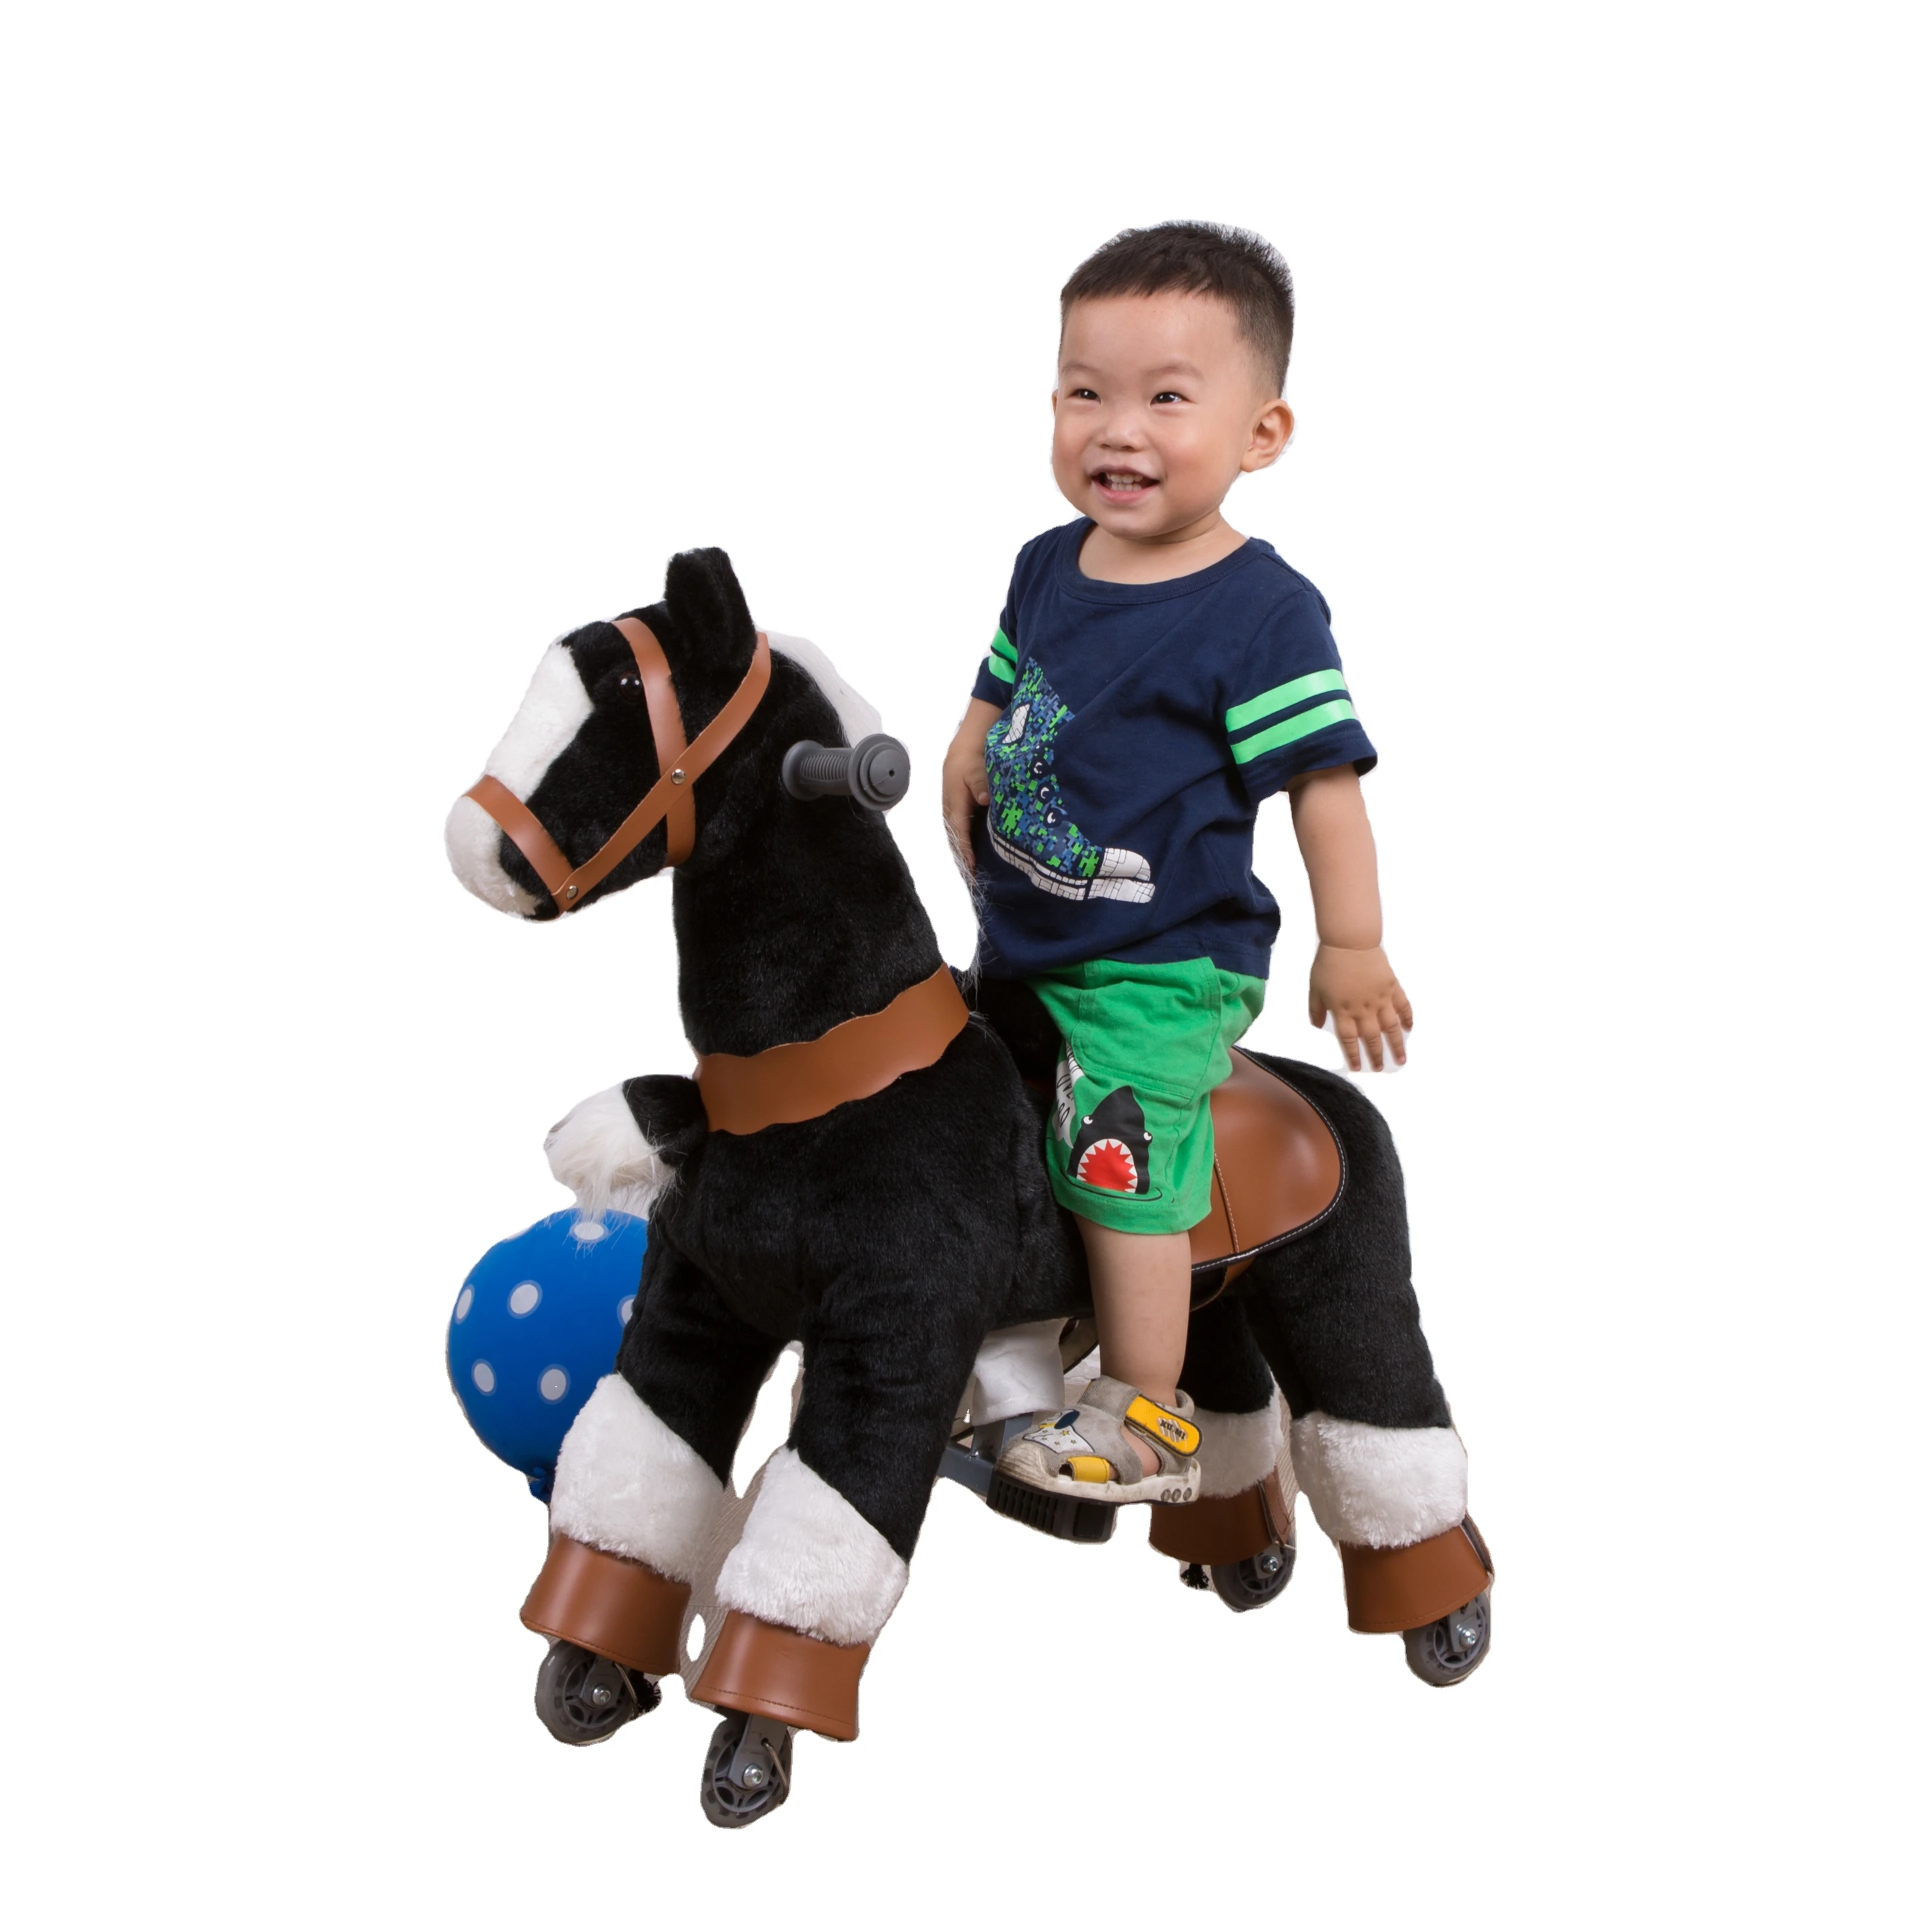 Ponyfunny Ride On Animal Toys Electric Ride On Animals Toy Ride On Toy  Horse Kmart - Buy Ride On Animals Toy,Ride On Animals Toy Baby  Chair,Electric Ride On Toys Product on 